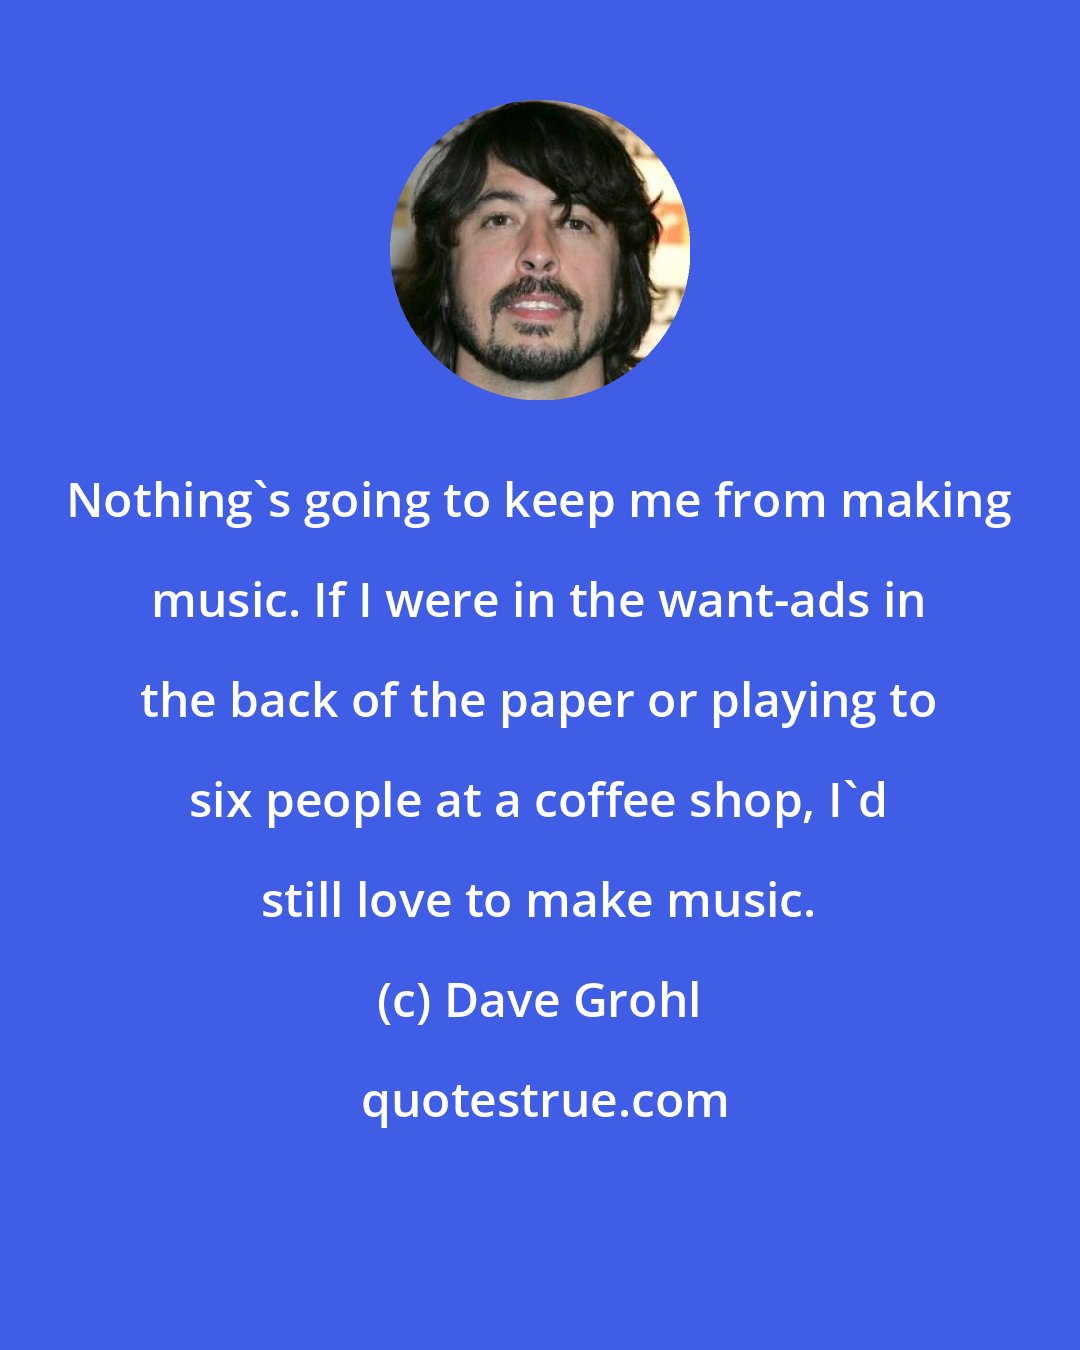 Dave Grohl: Nothing's going to keep me from making music. If I were in the want-ads in the back of the paper or playing to six people at a coffee shop, I'd still love to make music.